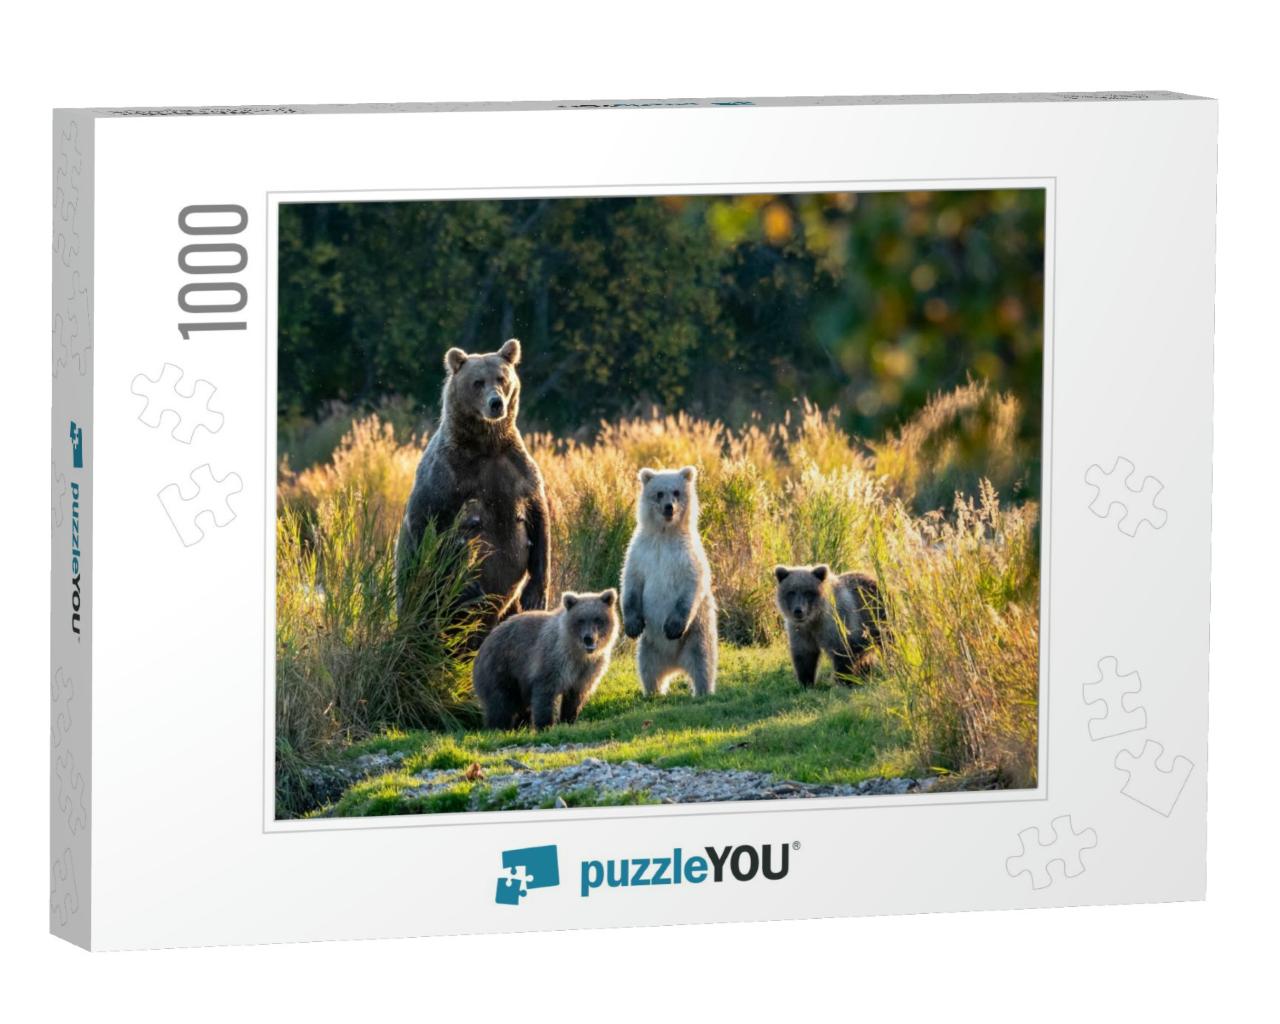 Large Adult Female Alaskan Brown Bear with Three Cute Cub... Jigsaw Puzzle with 1000 pieces